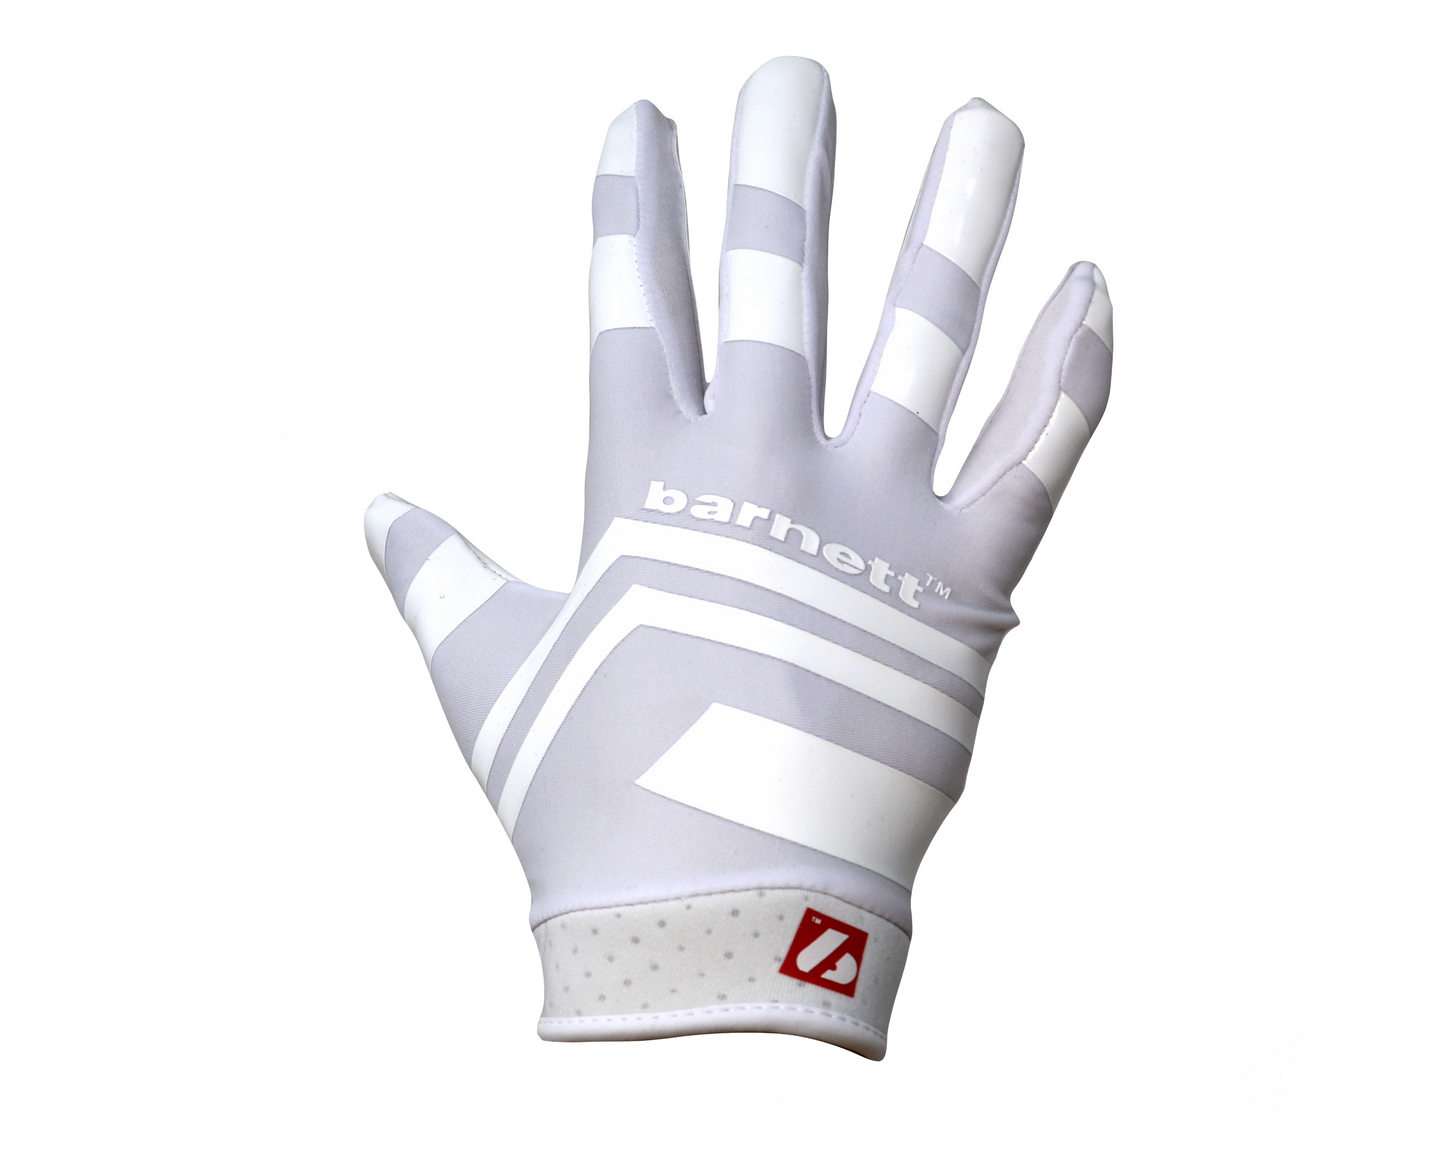 FRG-03 The best receiver football gloves, RE,DB,RB, White